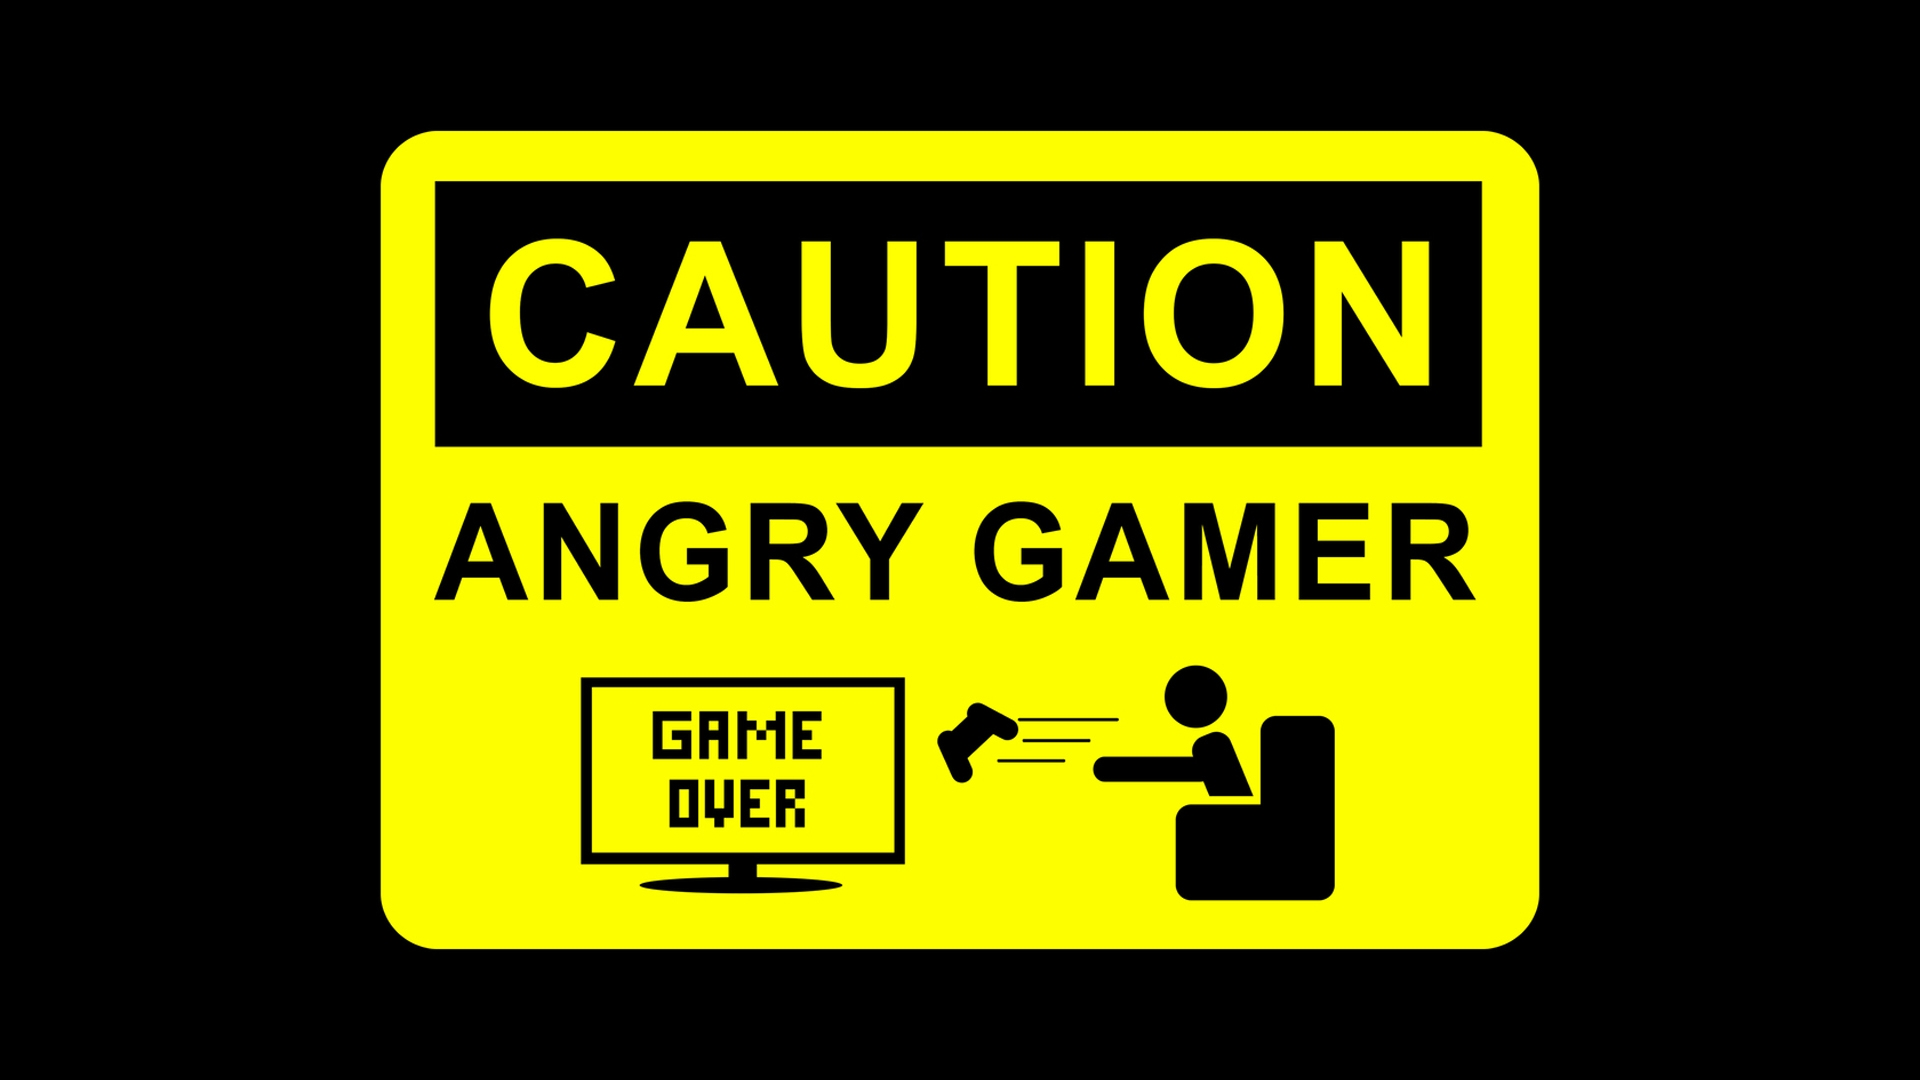 Concerns about violence in video games – in 3d!